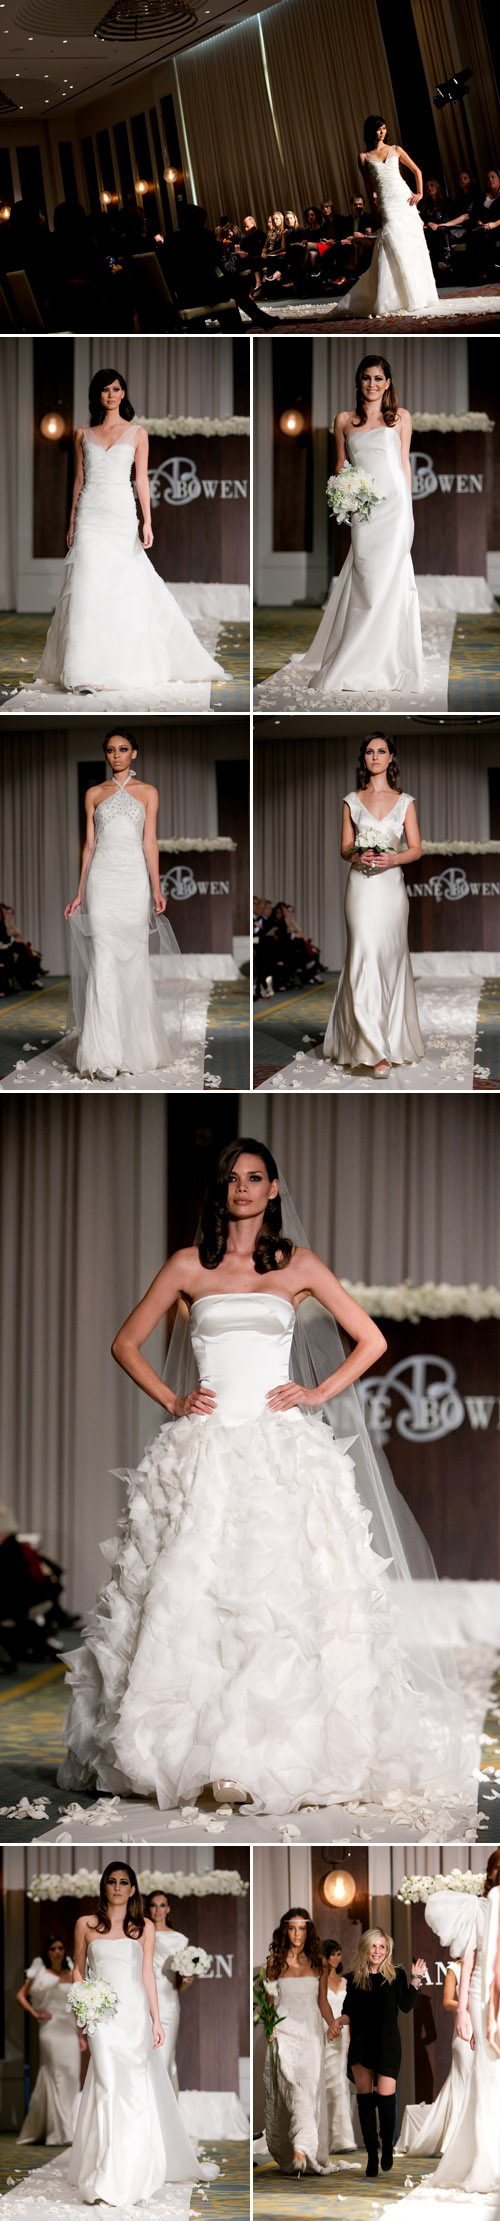 Anne Bowen Spring 2011 wedding dress colleciton from NY Bridal Market, photos by John and Joseph Photography